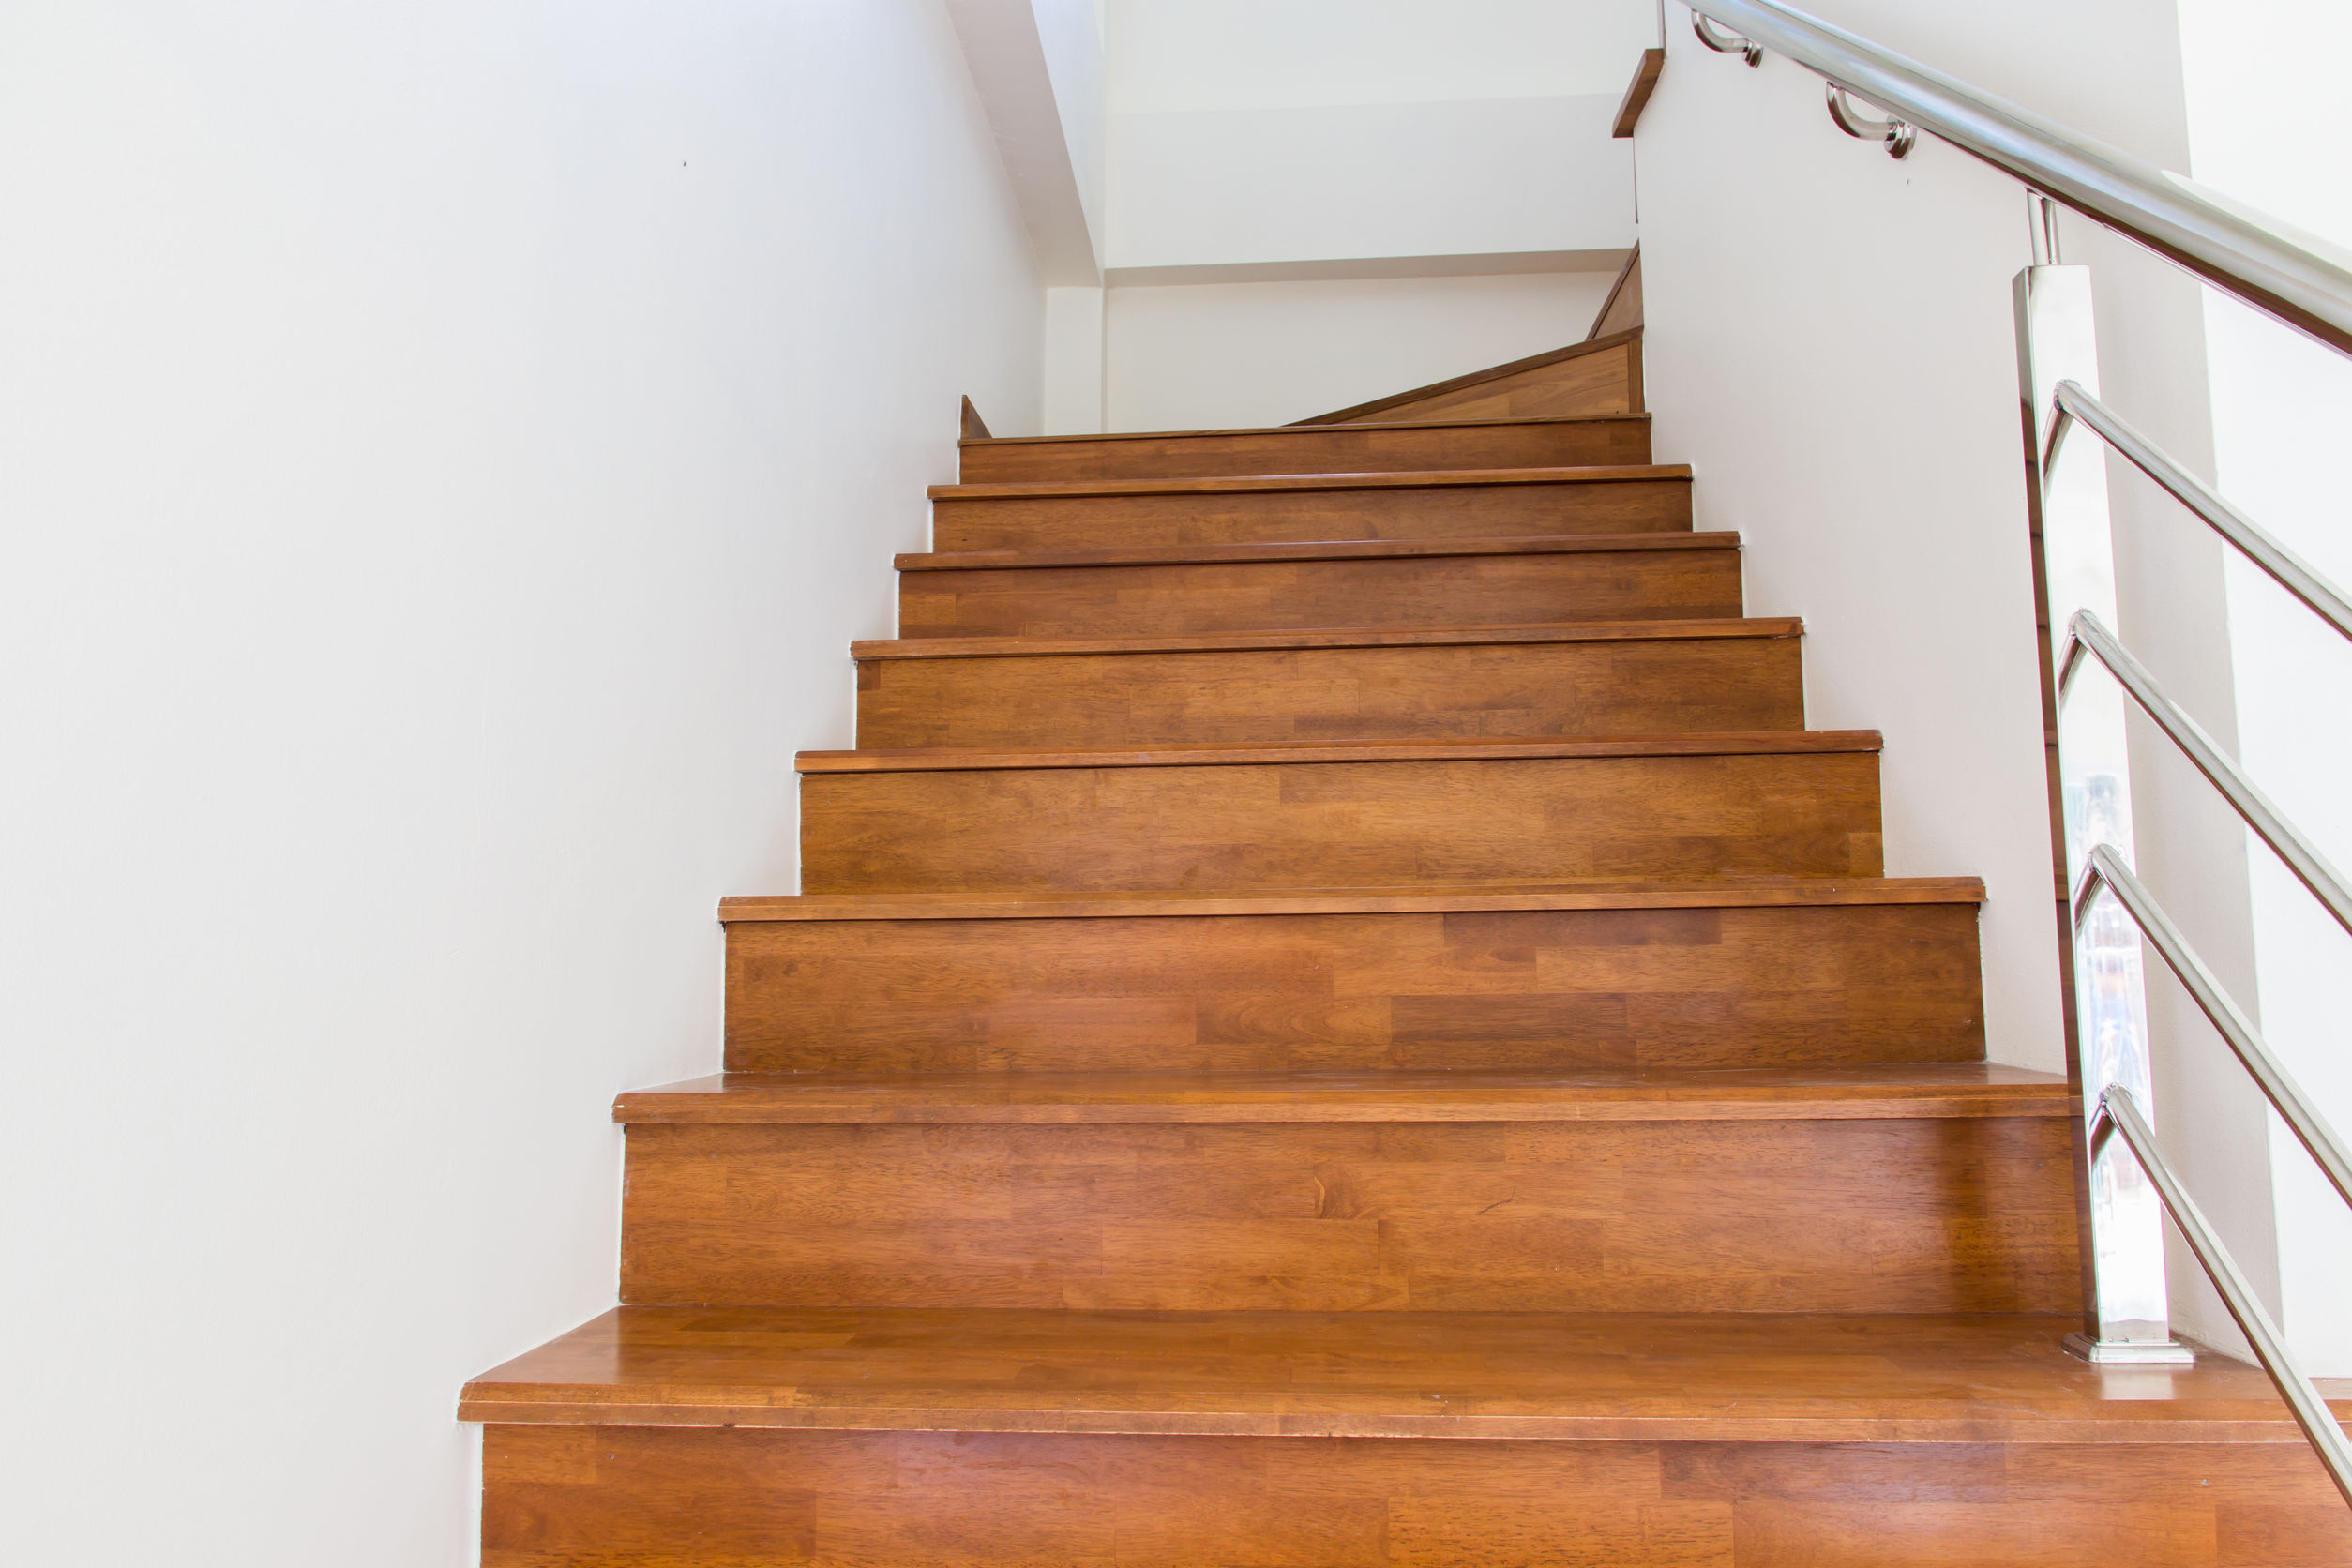 ... they have besides carpet; laminate flooring on stairs tends to be FHYAGAR